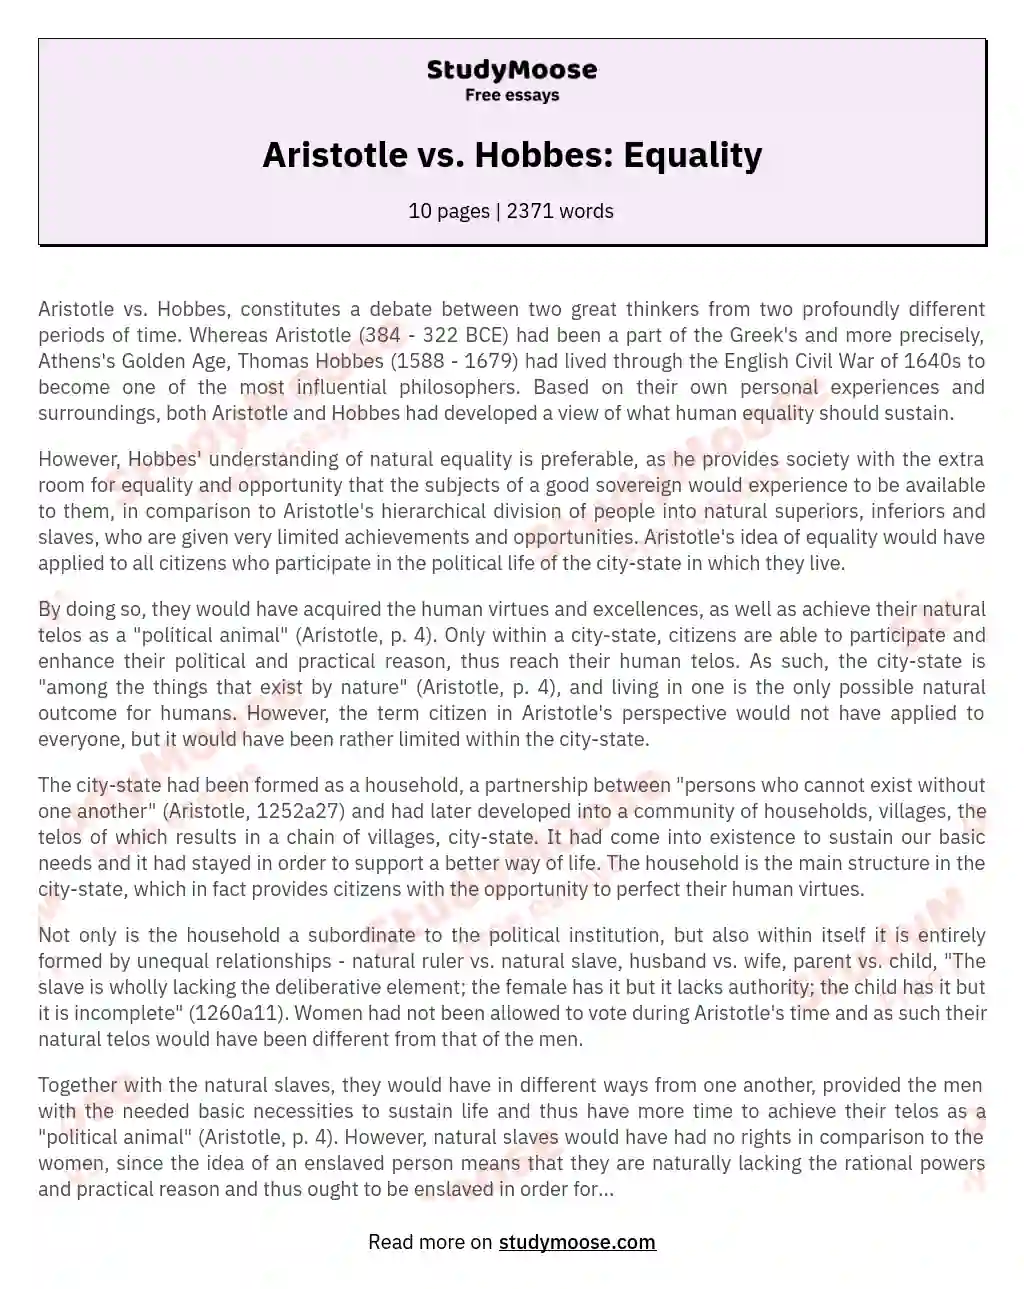 Aristotle vs. Hobbes: Equality in Society essay